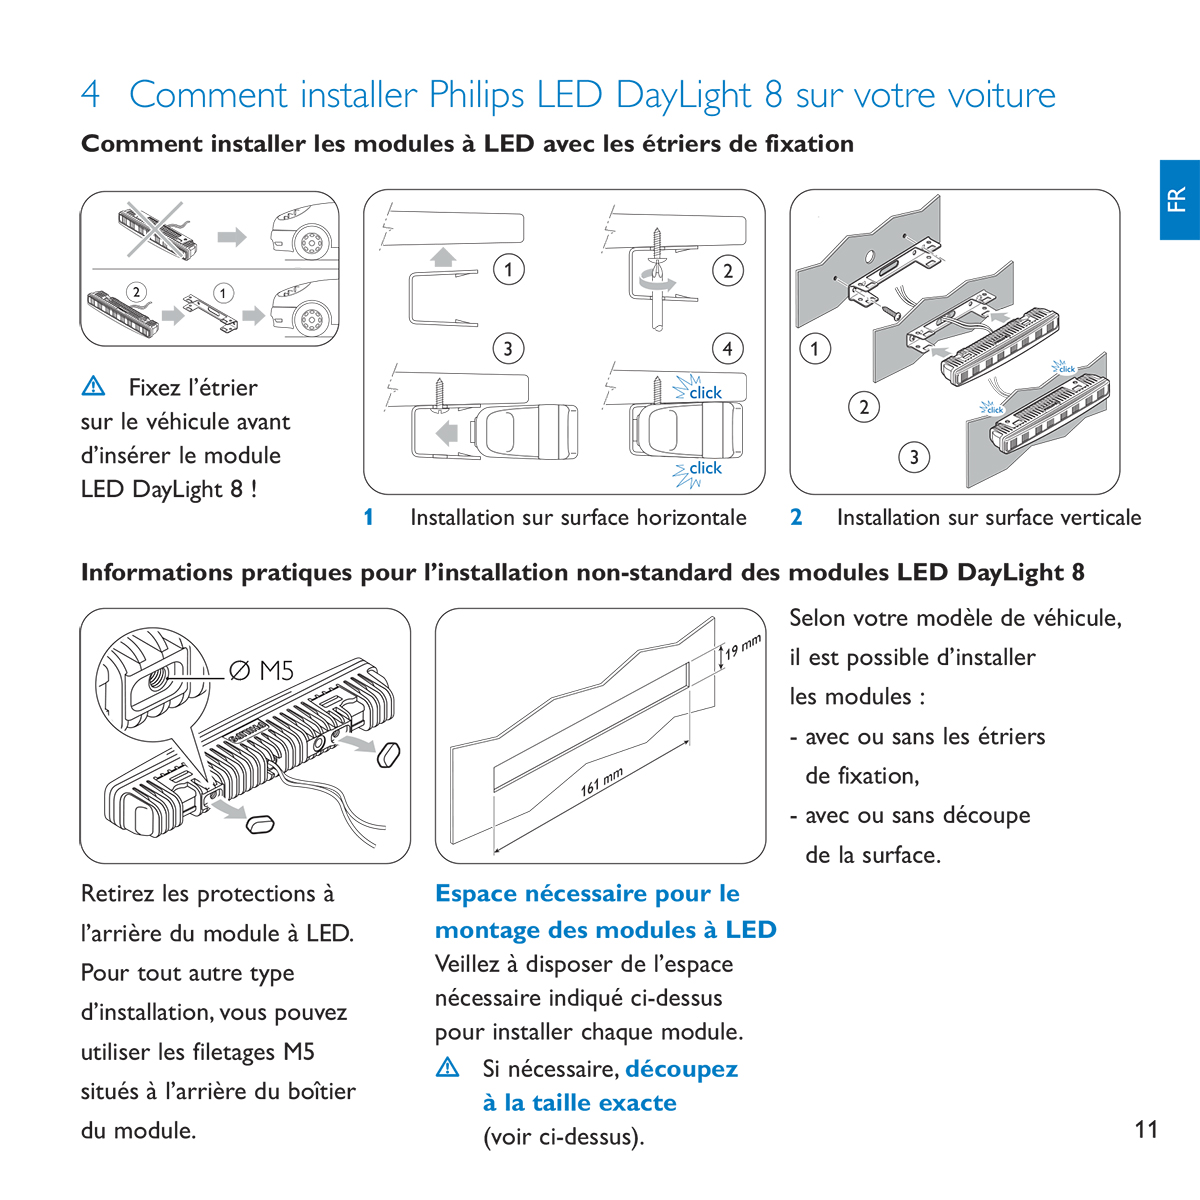 Philips LED DayLight 8 user guide - Inside page - French